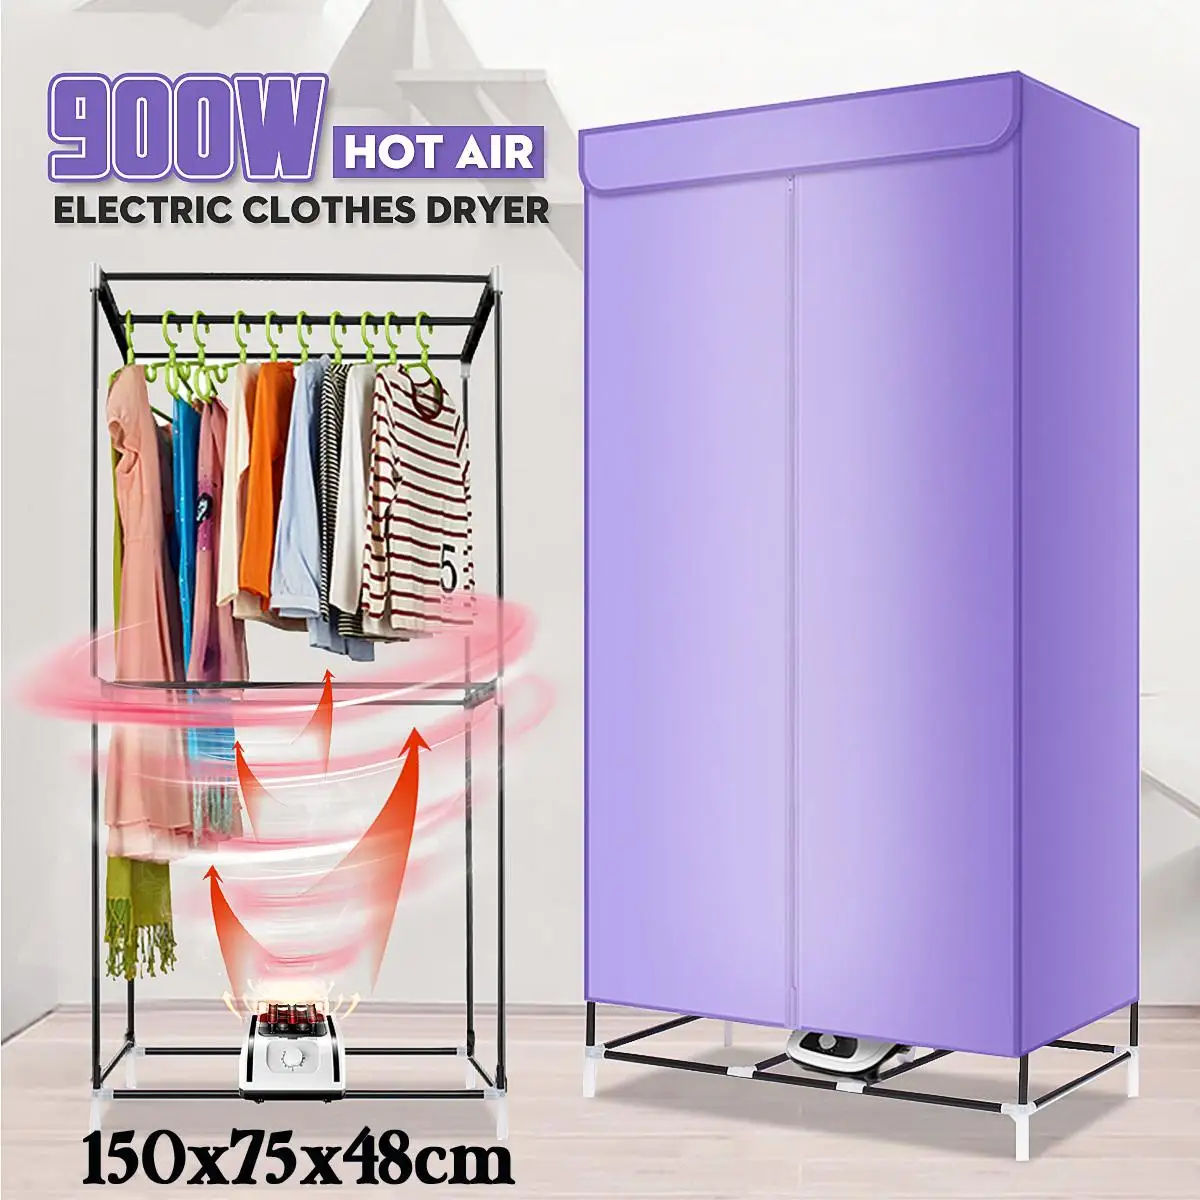 900W foldable electric clothes dryer, portable warm air dryer, fast heating laundry hanger, shoe dryer